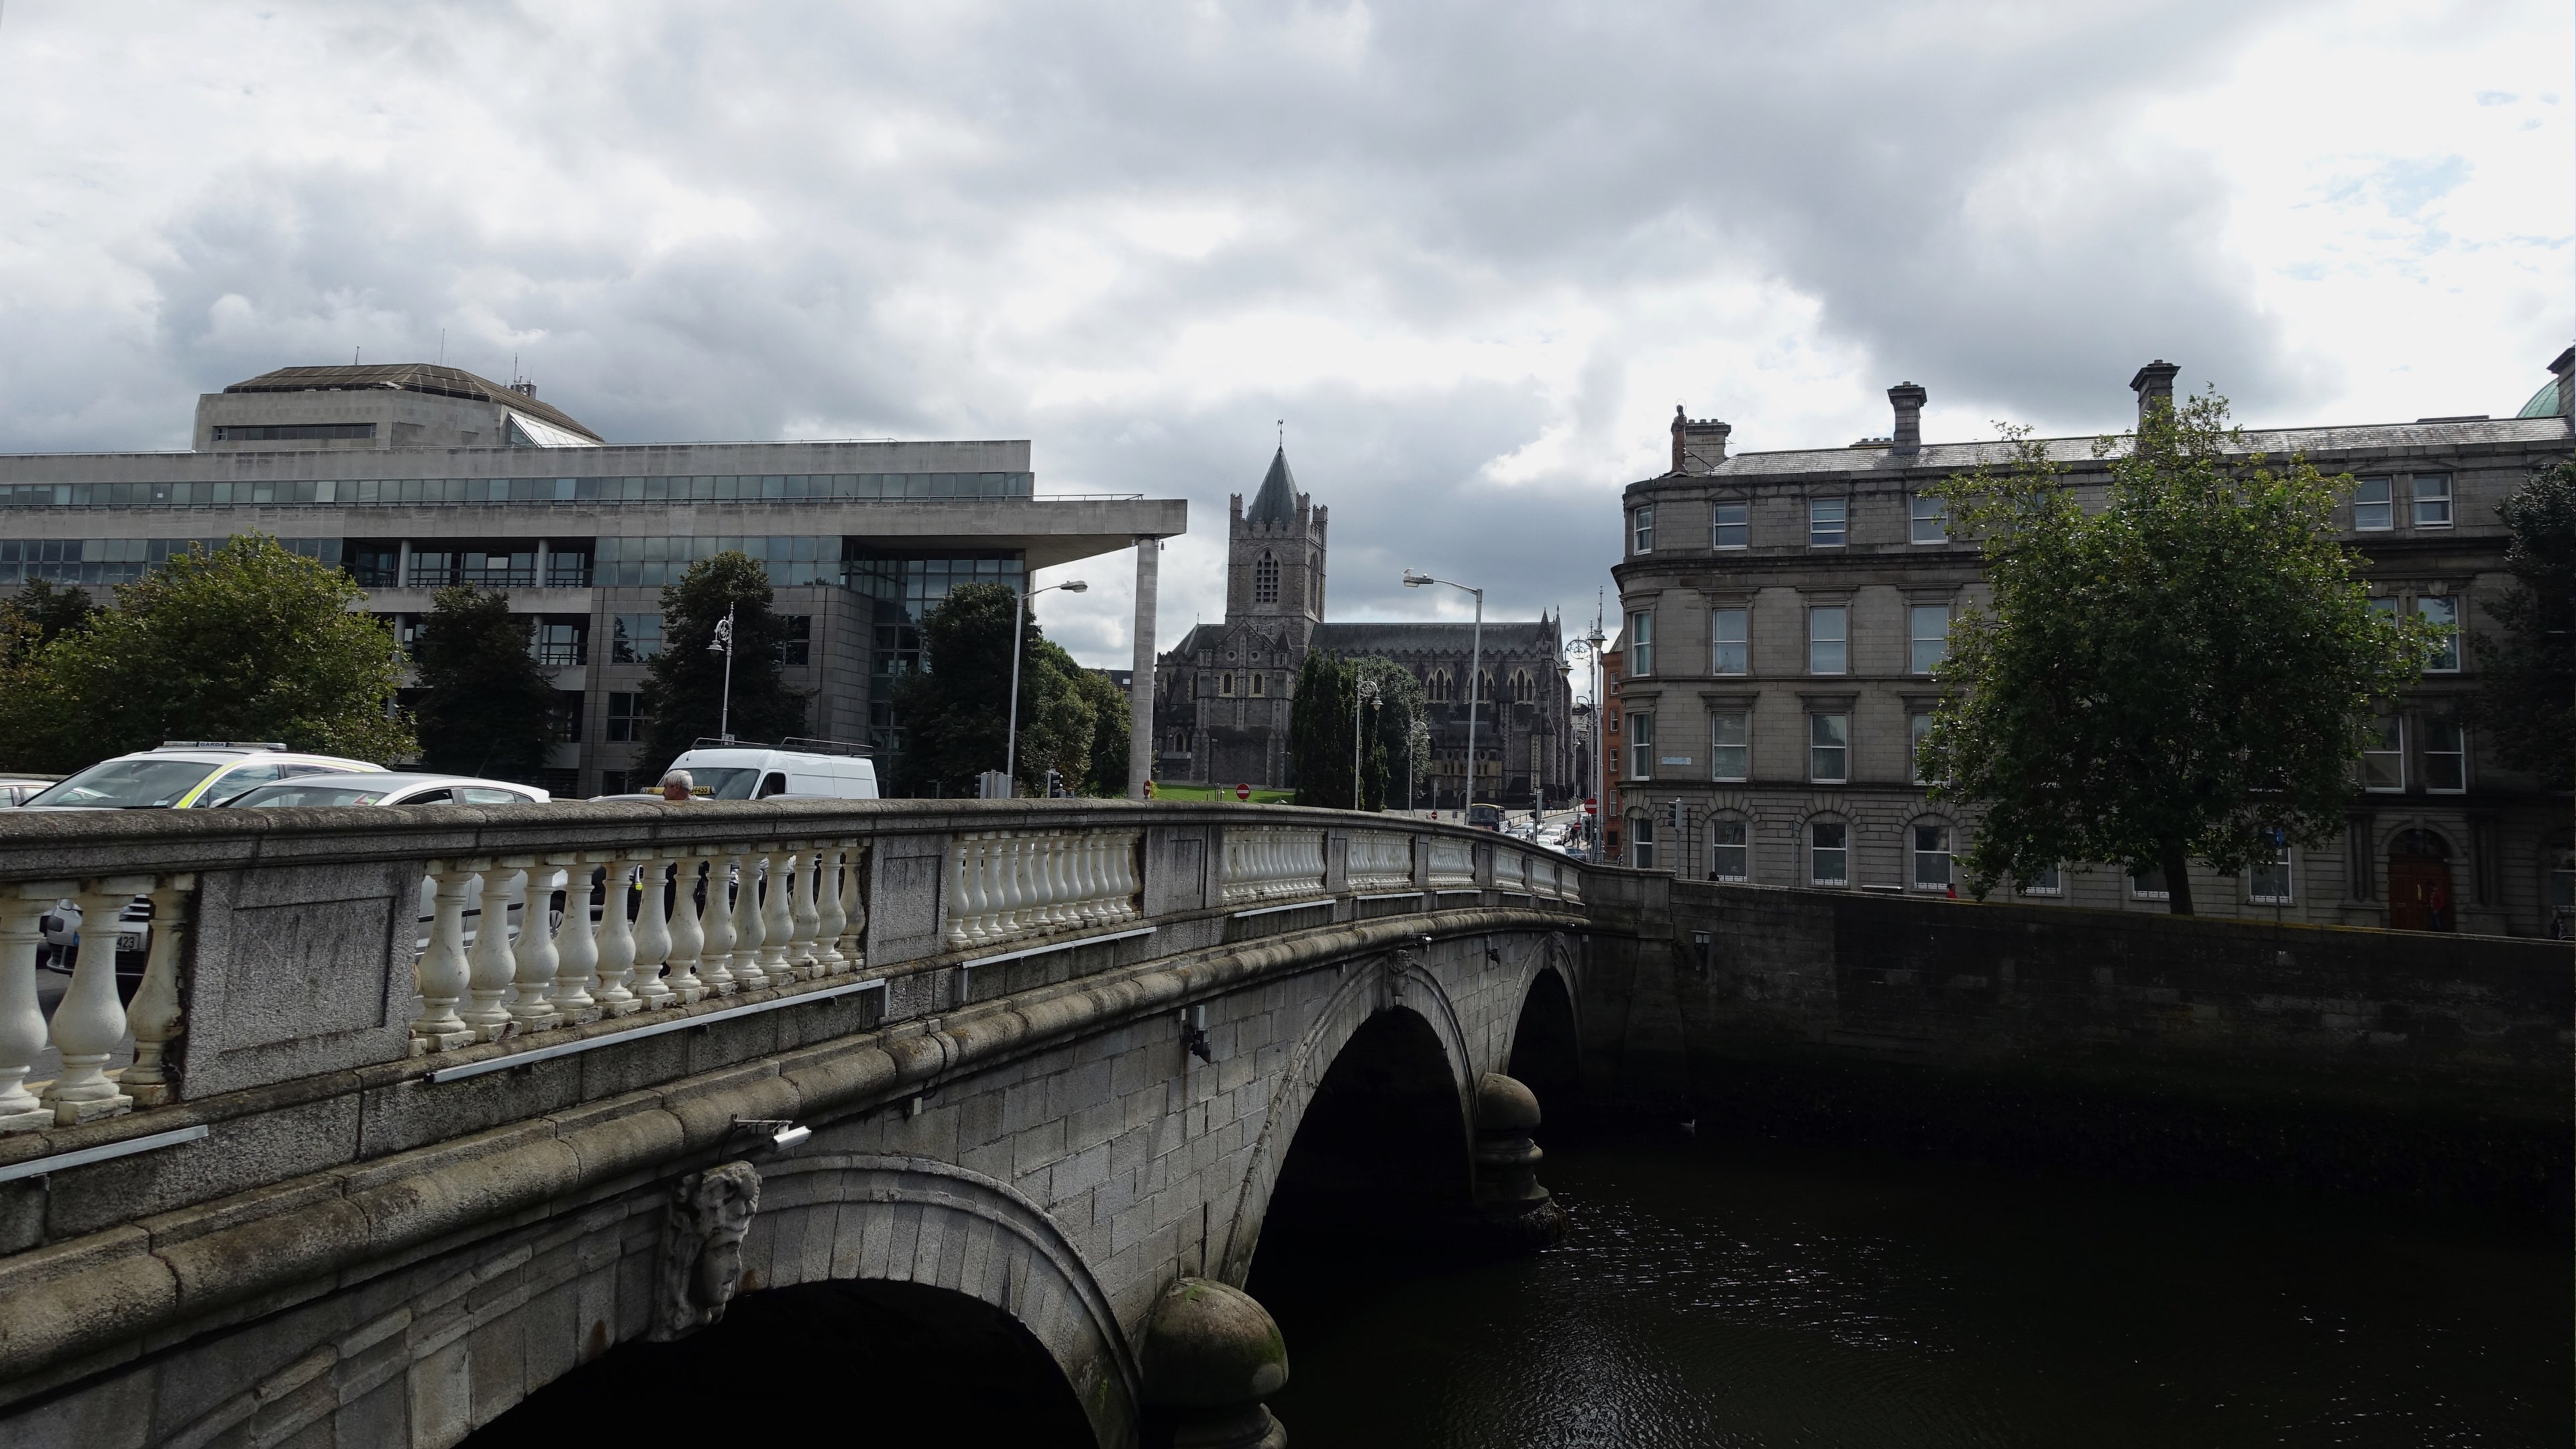 Christ Church Cathedral in Dublin as seen from across the Liffey river